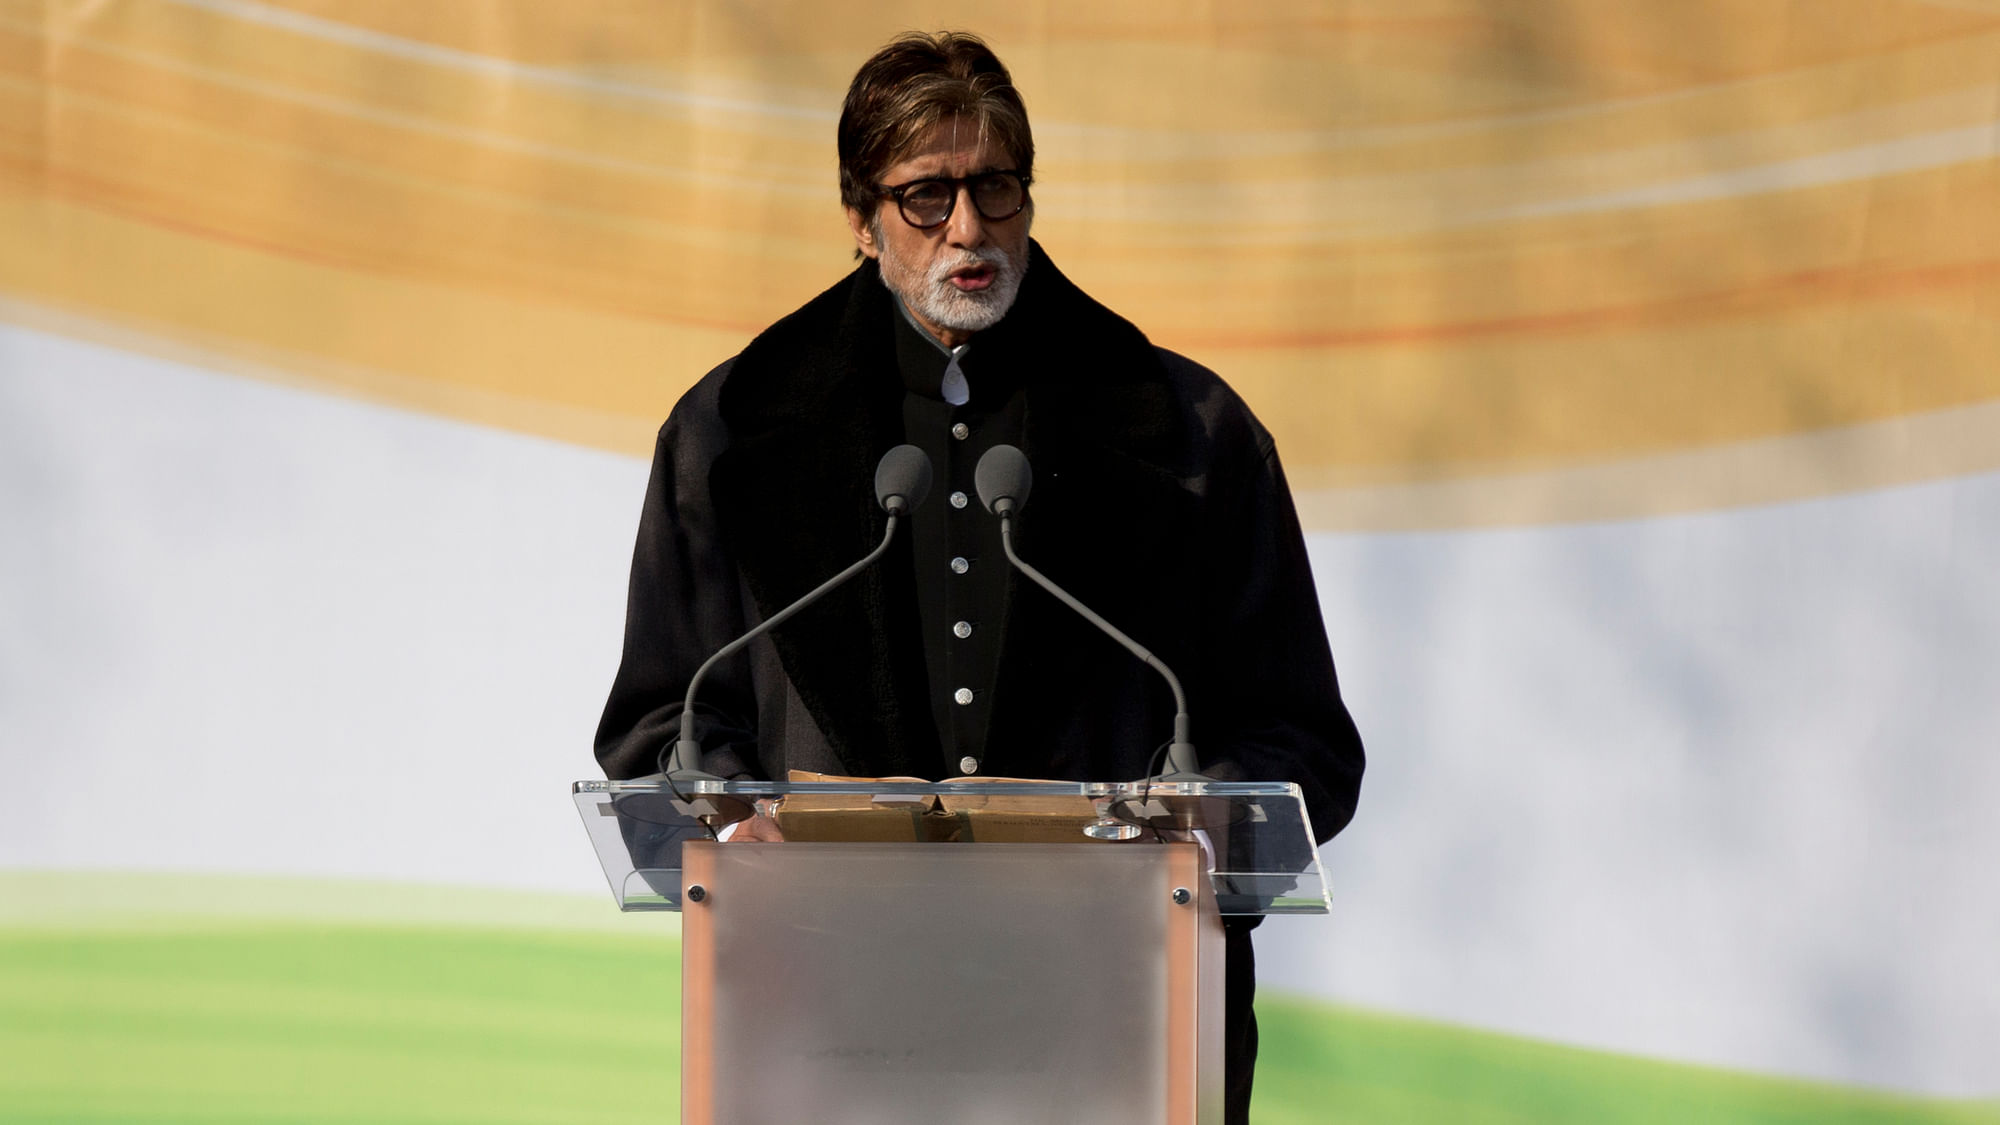 File photo of Bollywood actor Amitabh Bachchan. (Photo: Reuters)